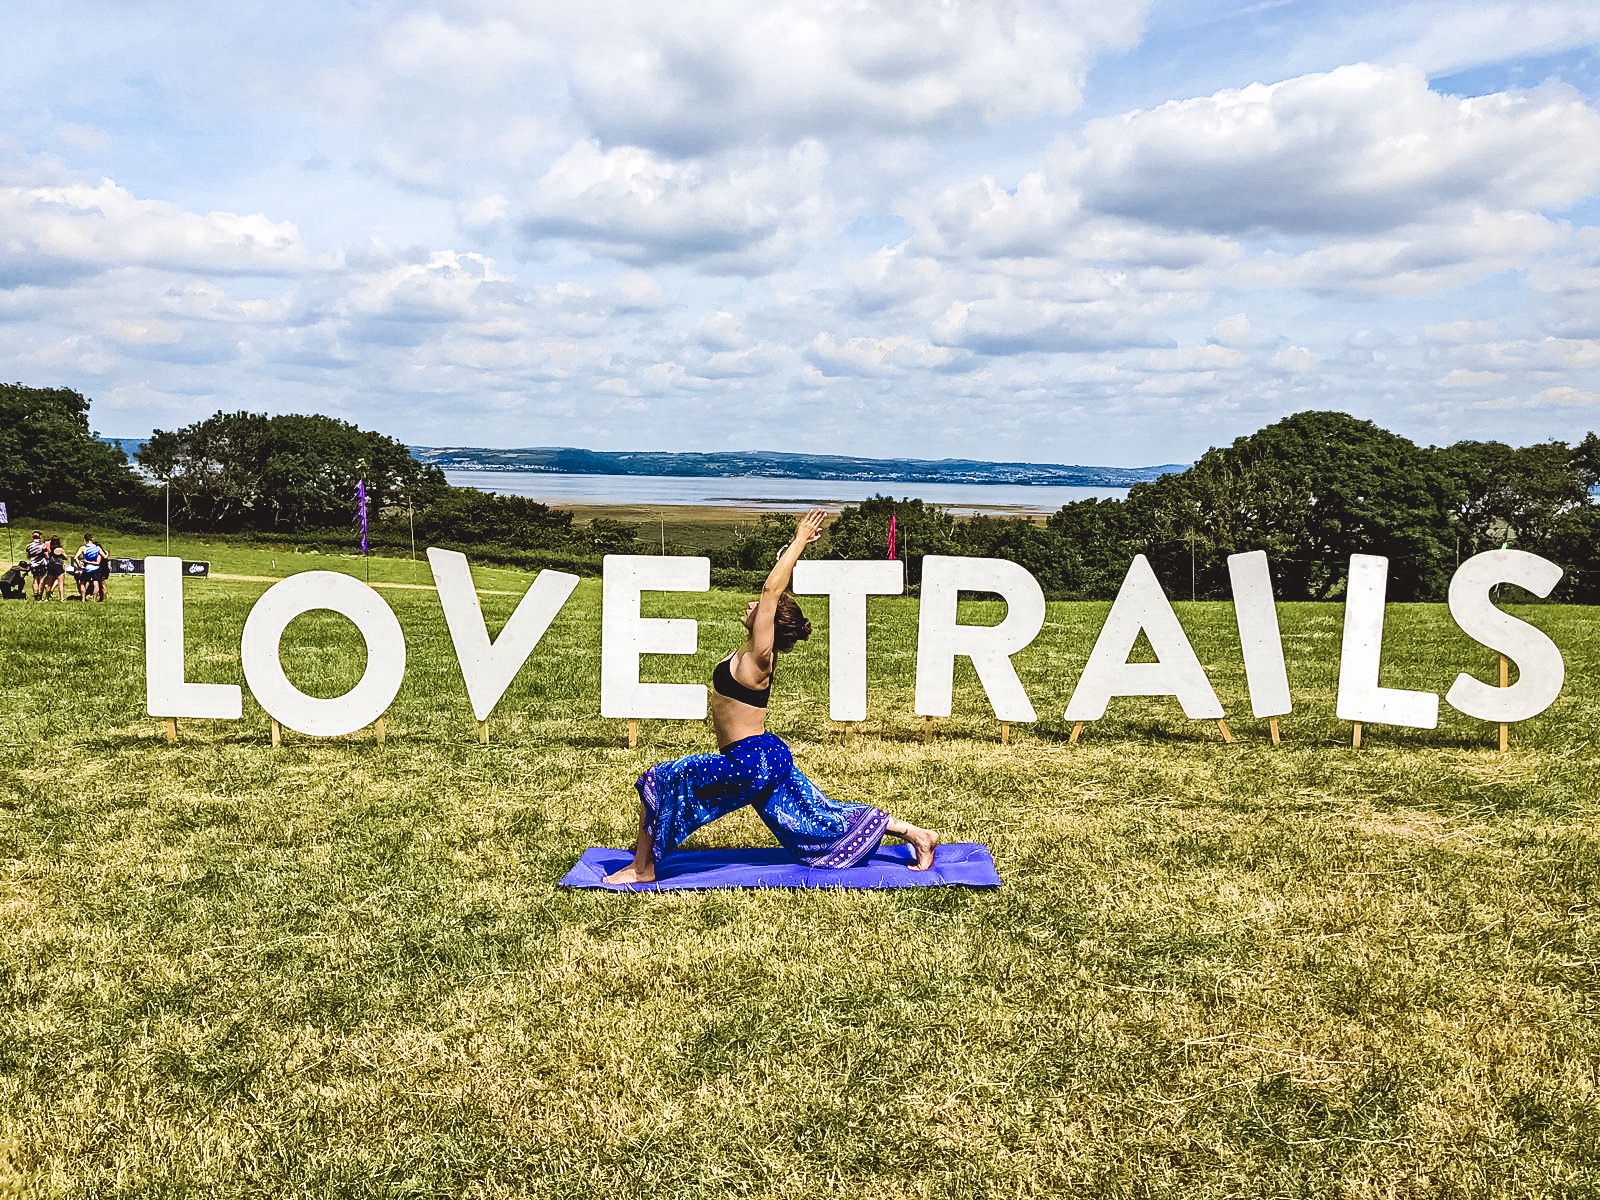 Love trails festival with girl standing in yoga pose in front of Love trails sign